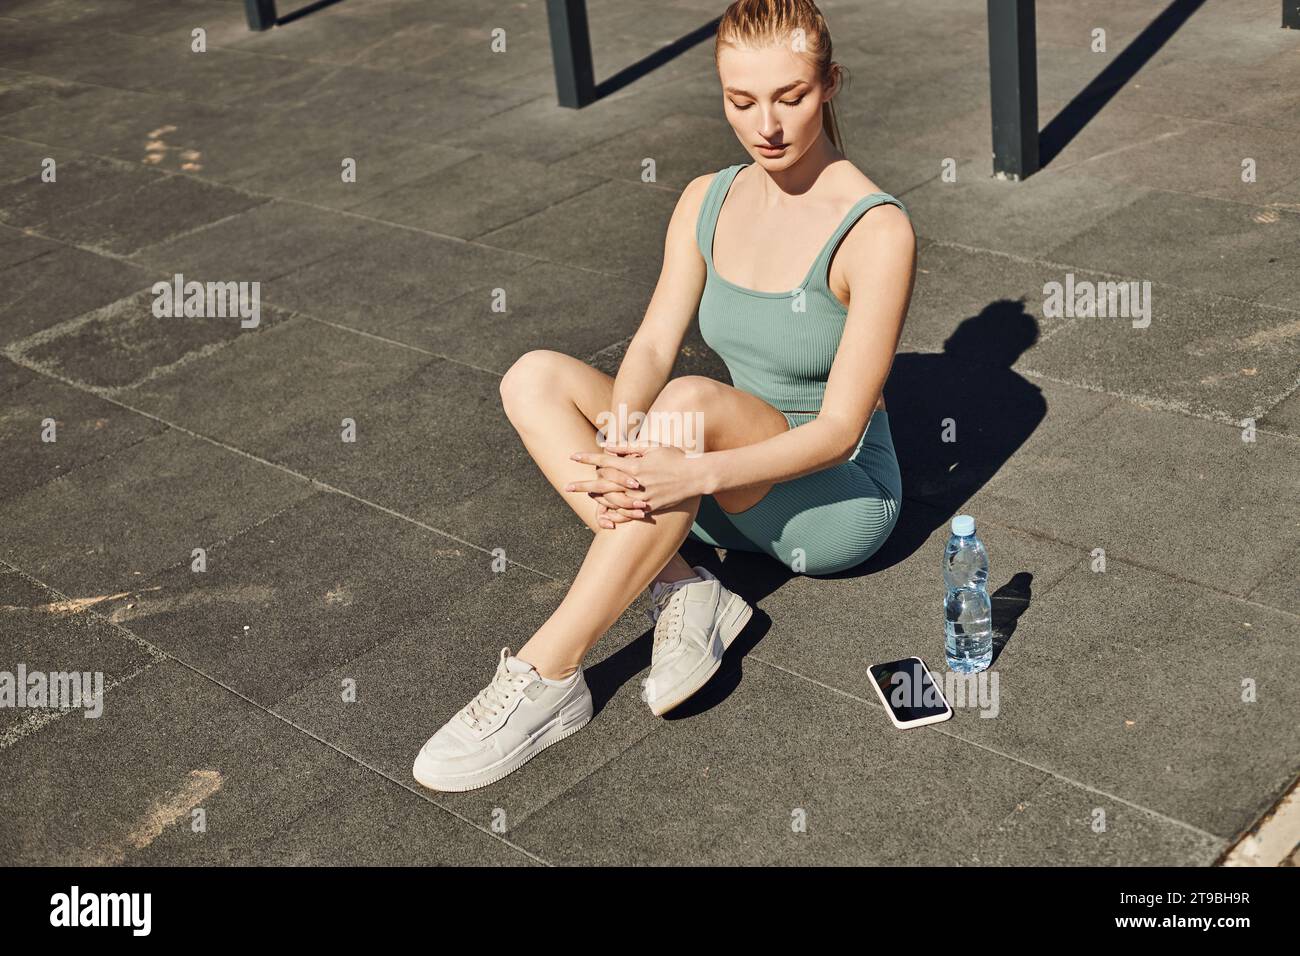 blonde sportswoman in tight activewear sitting next to bottle of water and smartphone on floor Stock Photo